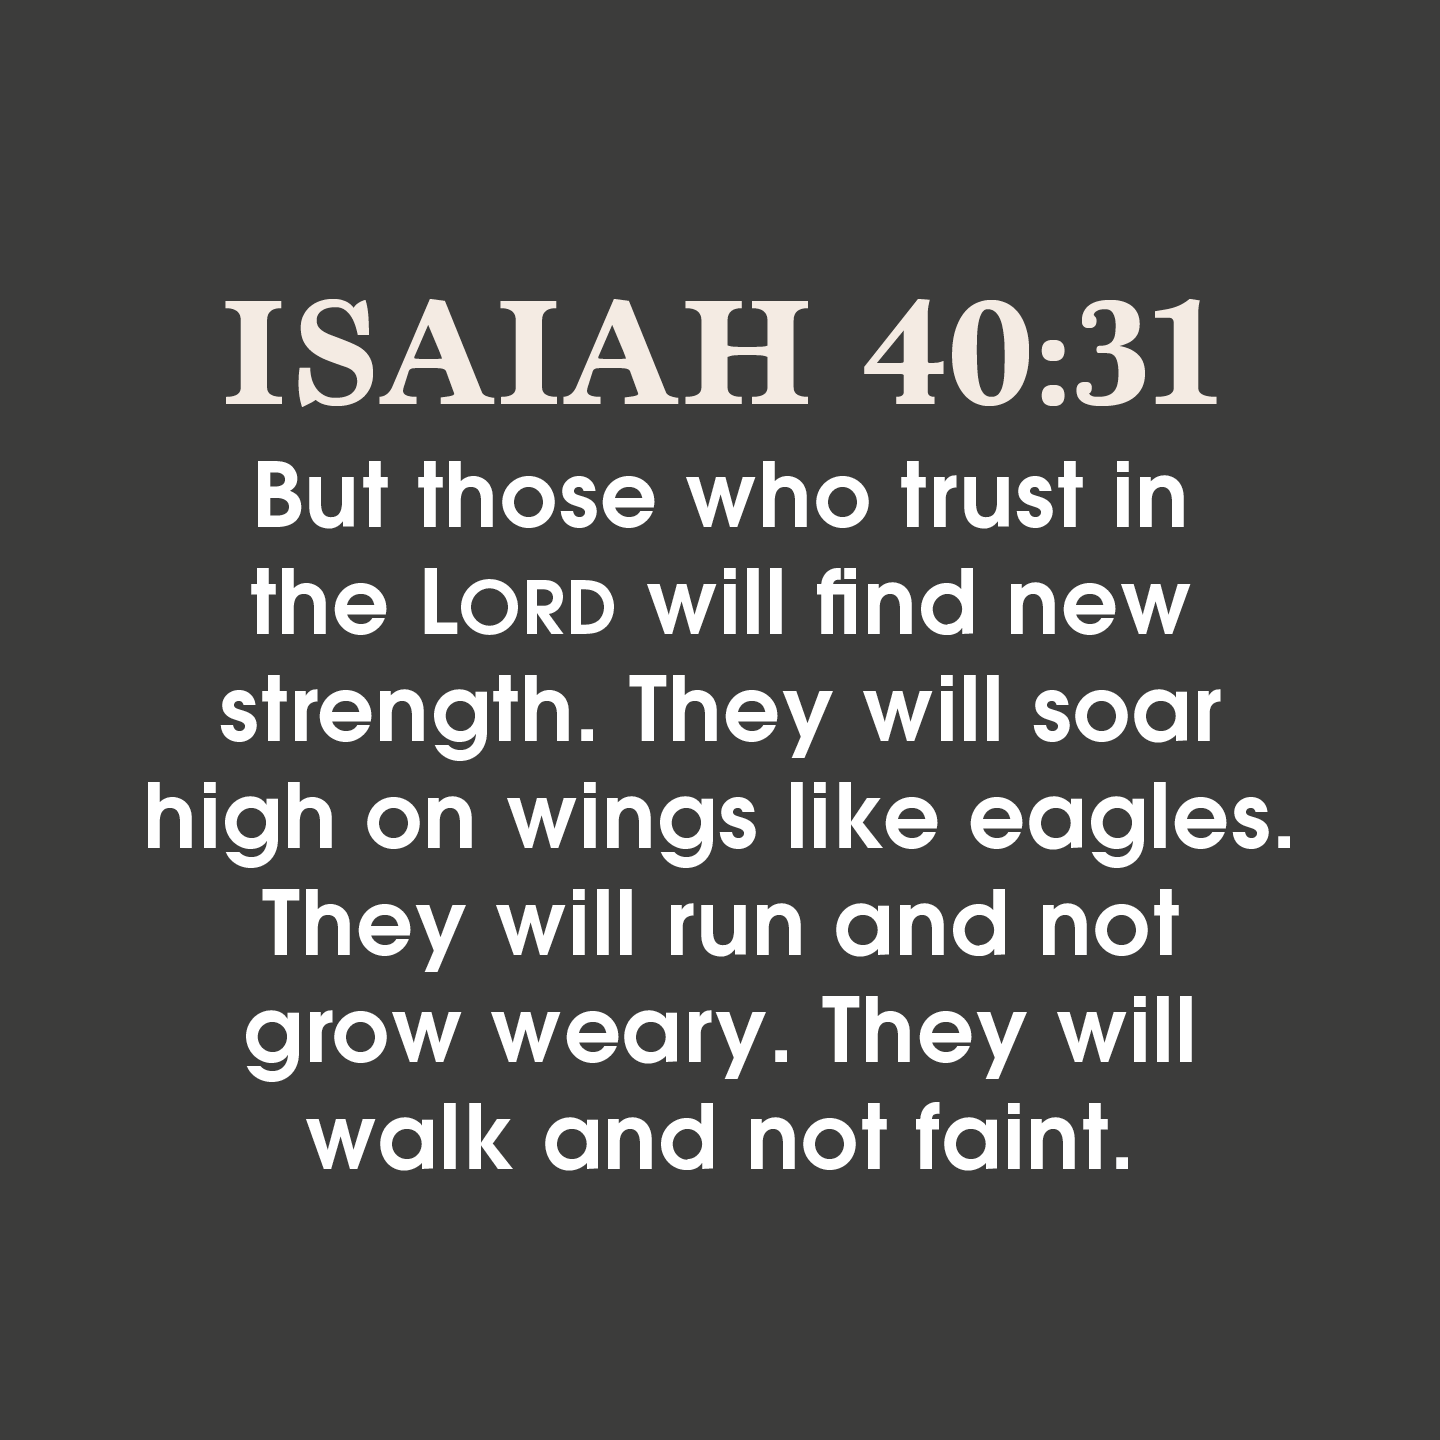 ISAIAH 40.31 But those who trust in the LORD will find new strength. They will soar high on wings like eagles. They will run and not grow weary. They will walk and not faint: